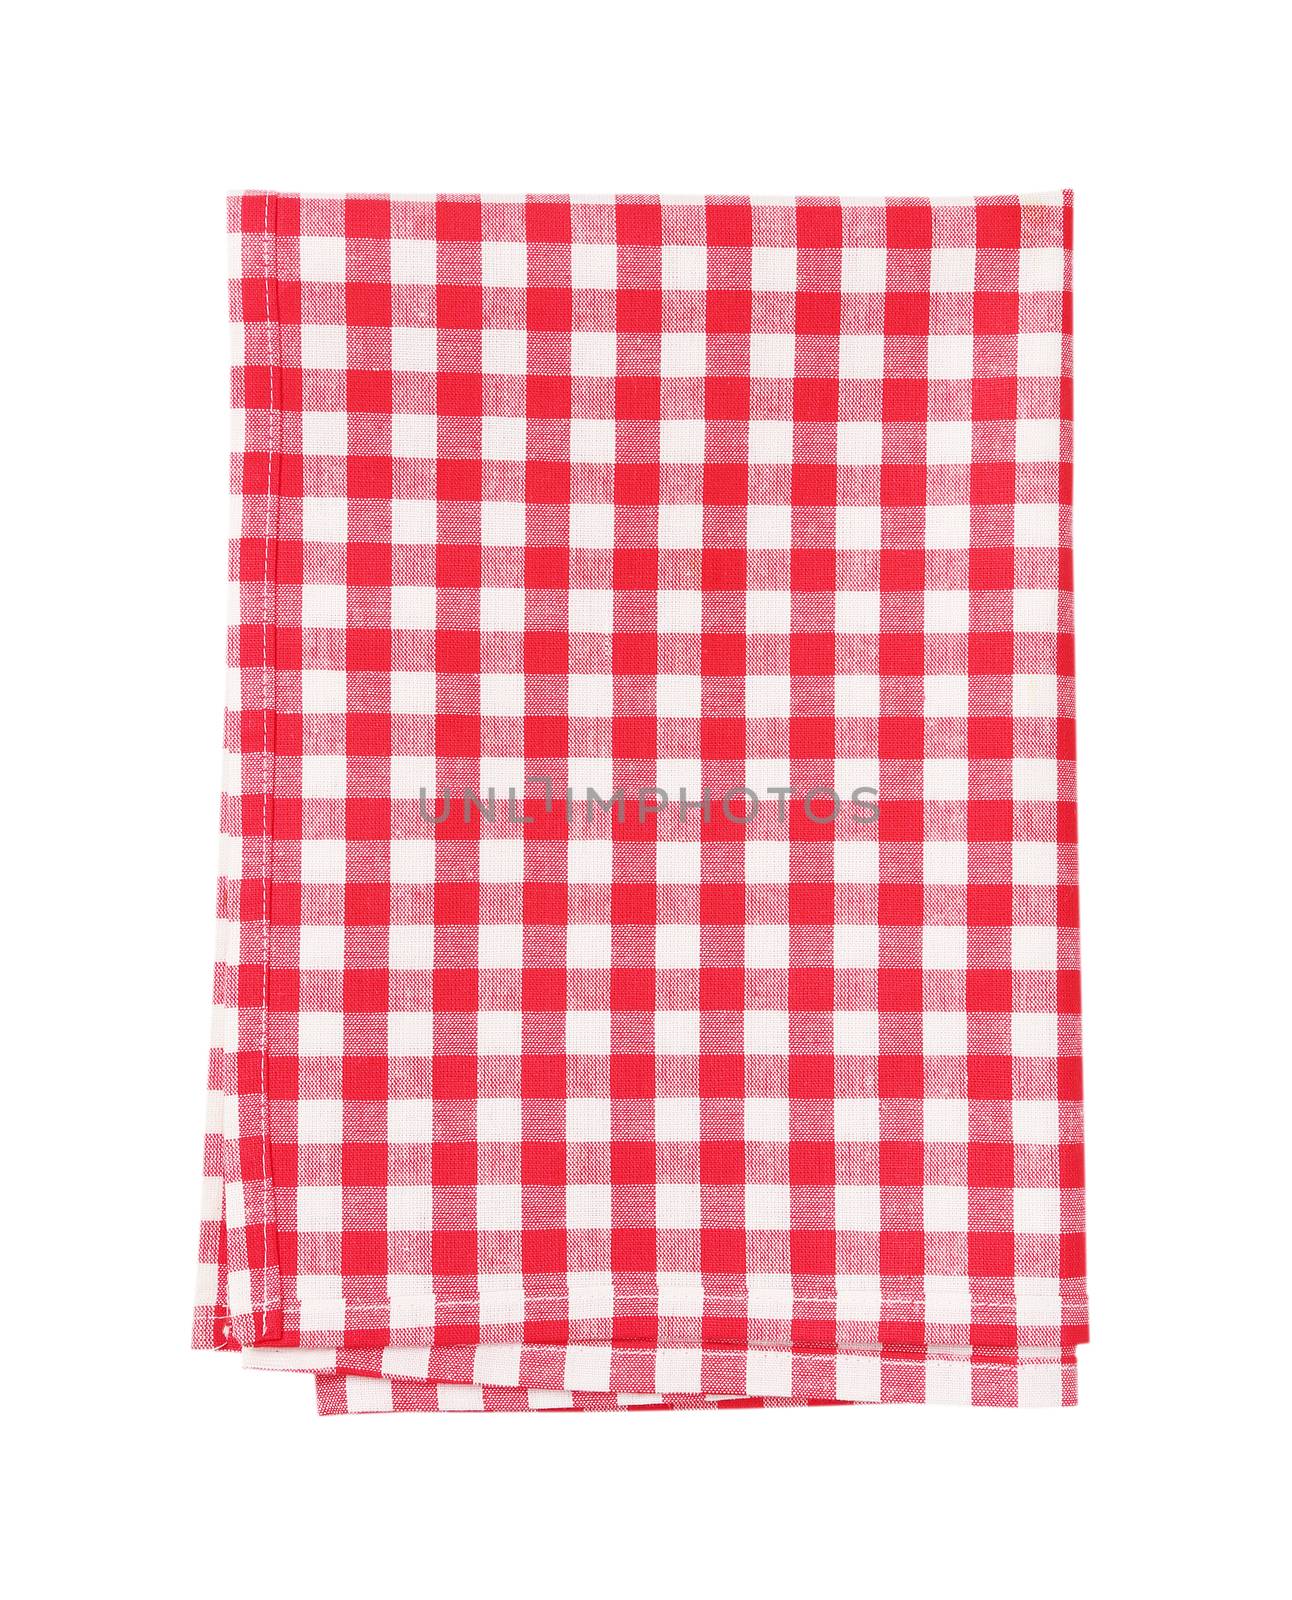 red and white tea towel by Digifoodstock